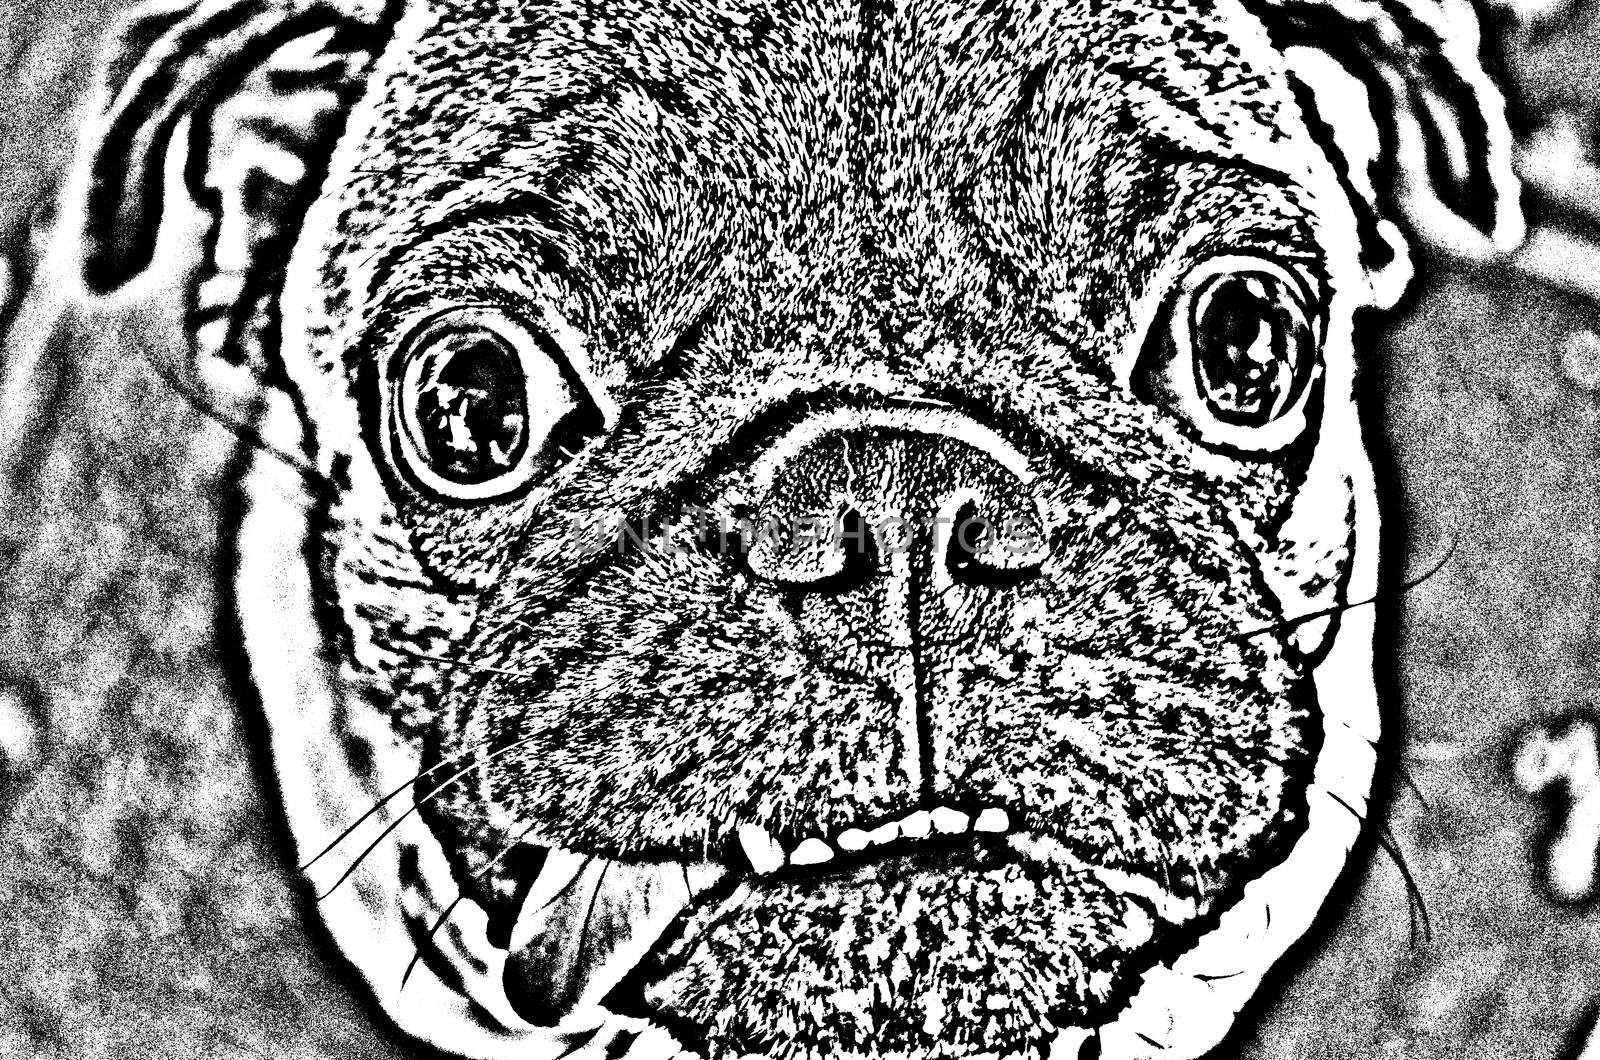 Cute Dog Series 1 No.2,made from photo by photoshop.